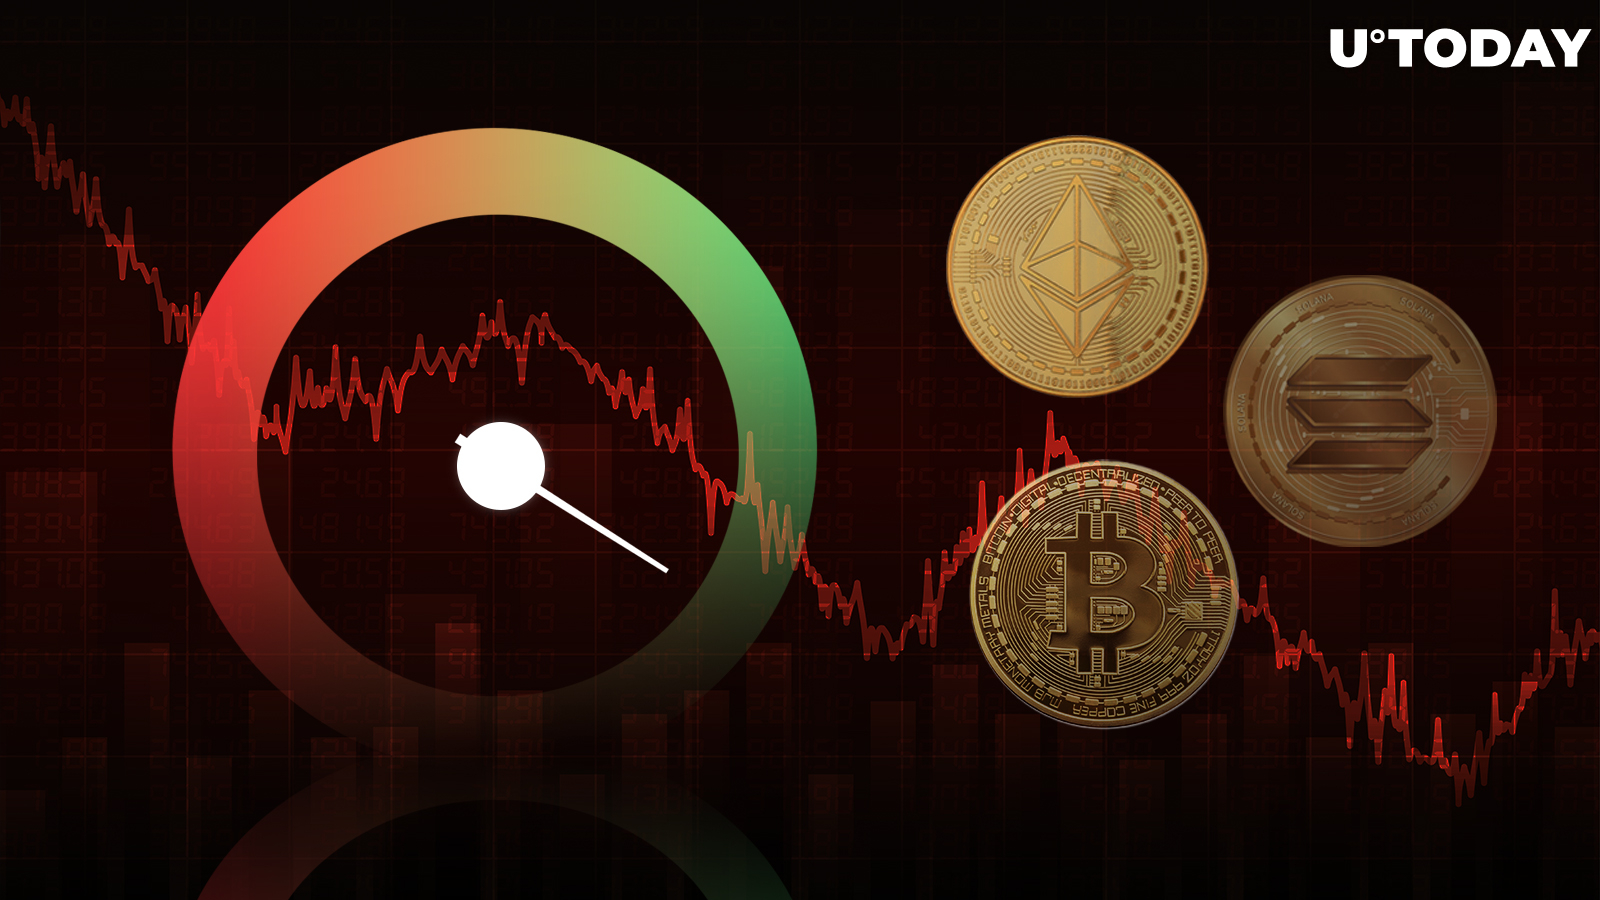 'Greed' on Crypto Market, Again, Here's What You Can Expect